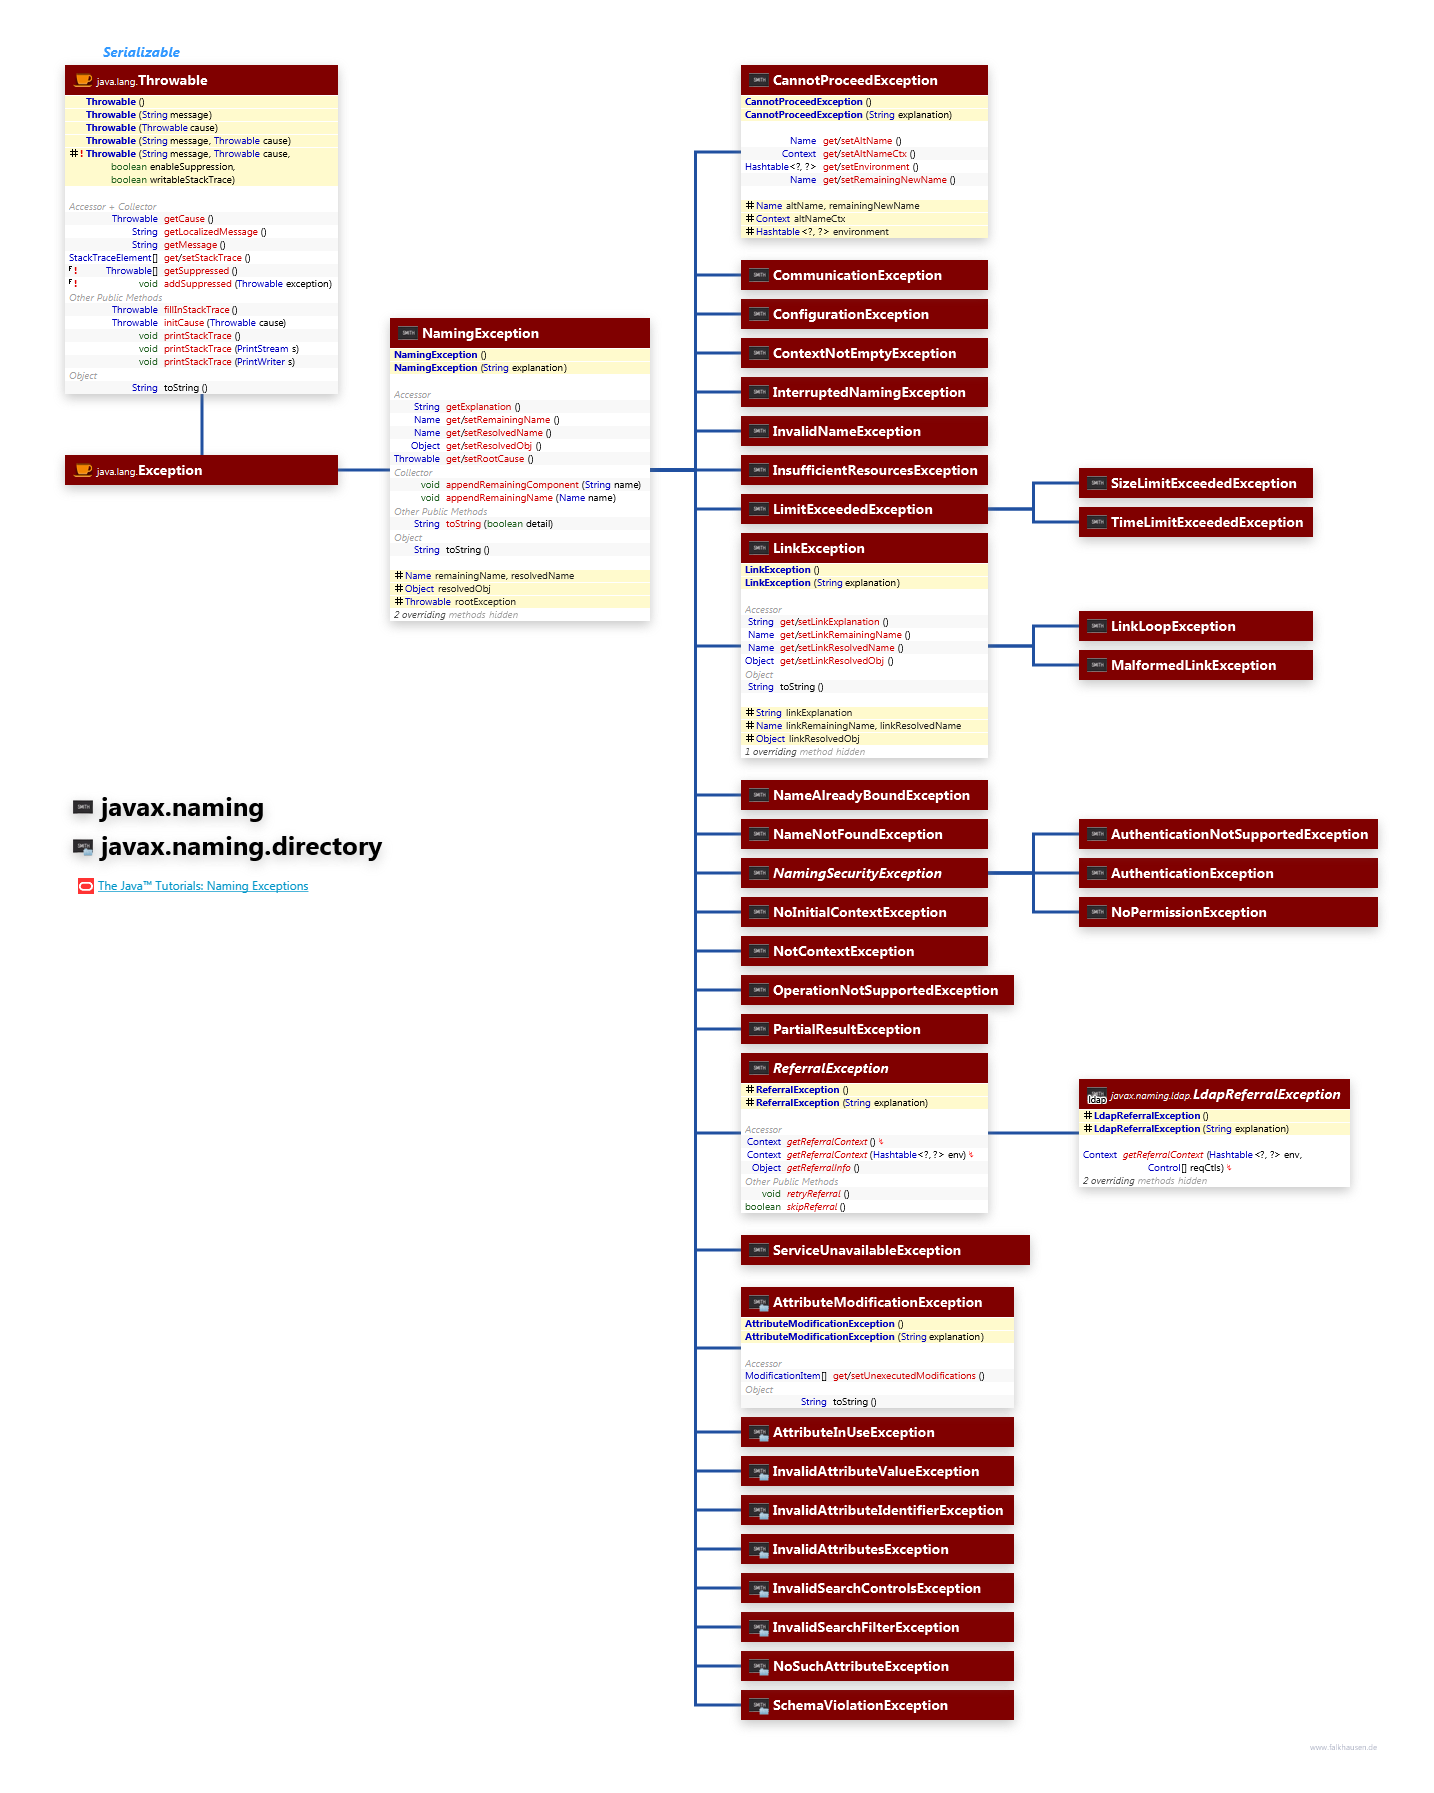 javax.naming javax.naming.directory Exceptions class diagram and api documentation for Java 7